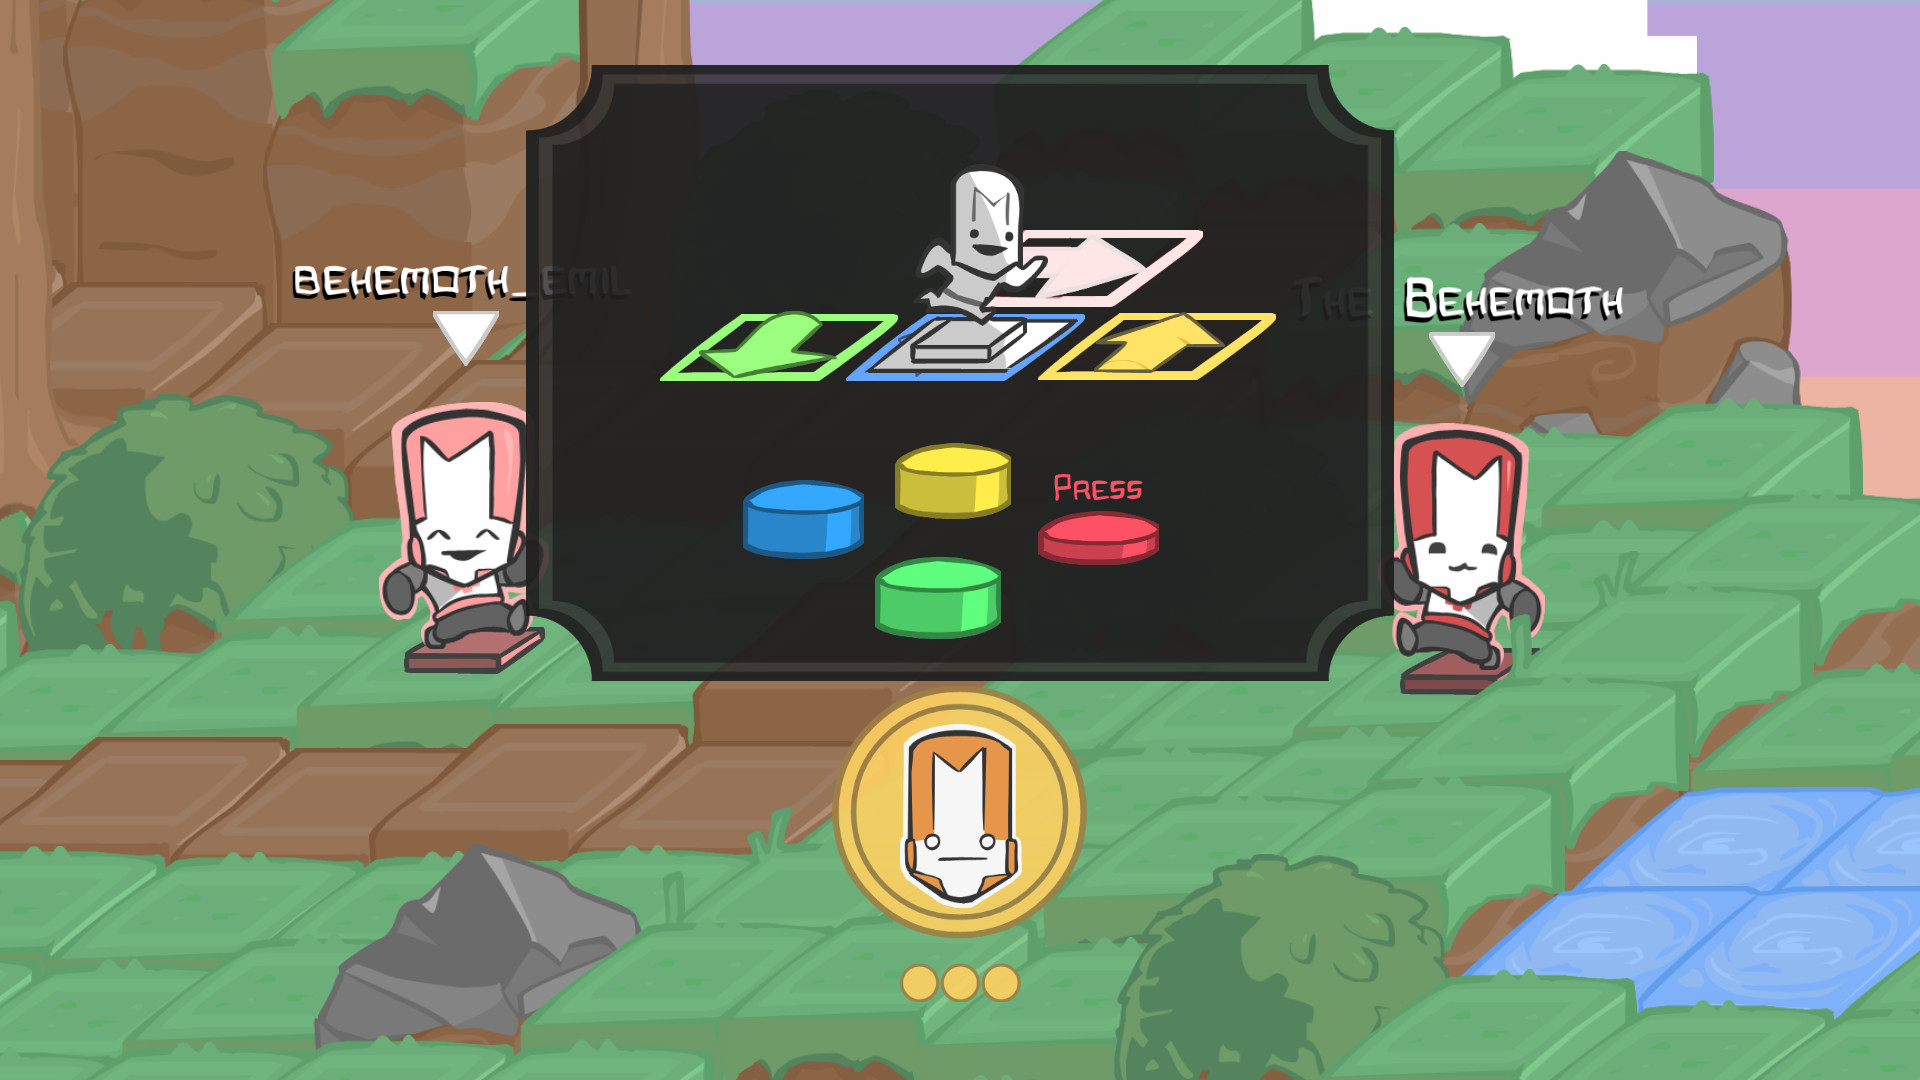 Play Castle Crashers Steam with Gameplay 2 – The Behemoth Blog